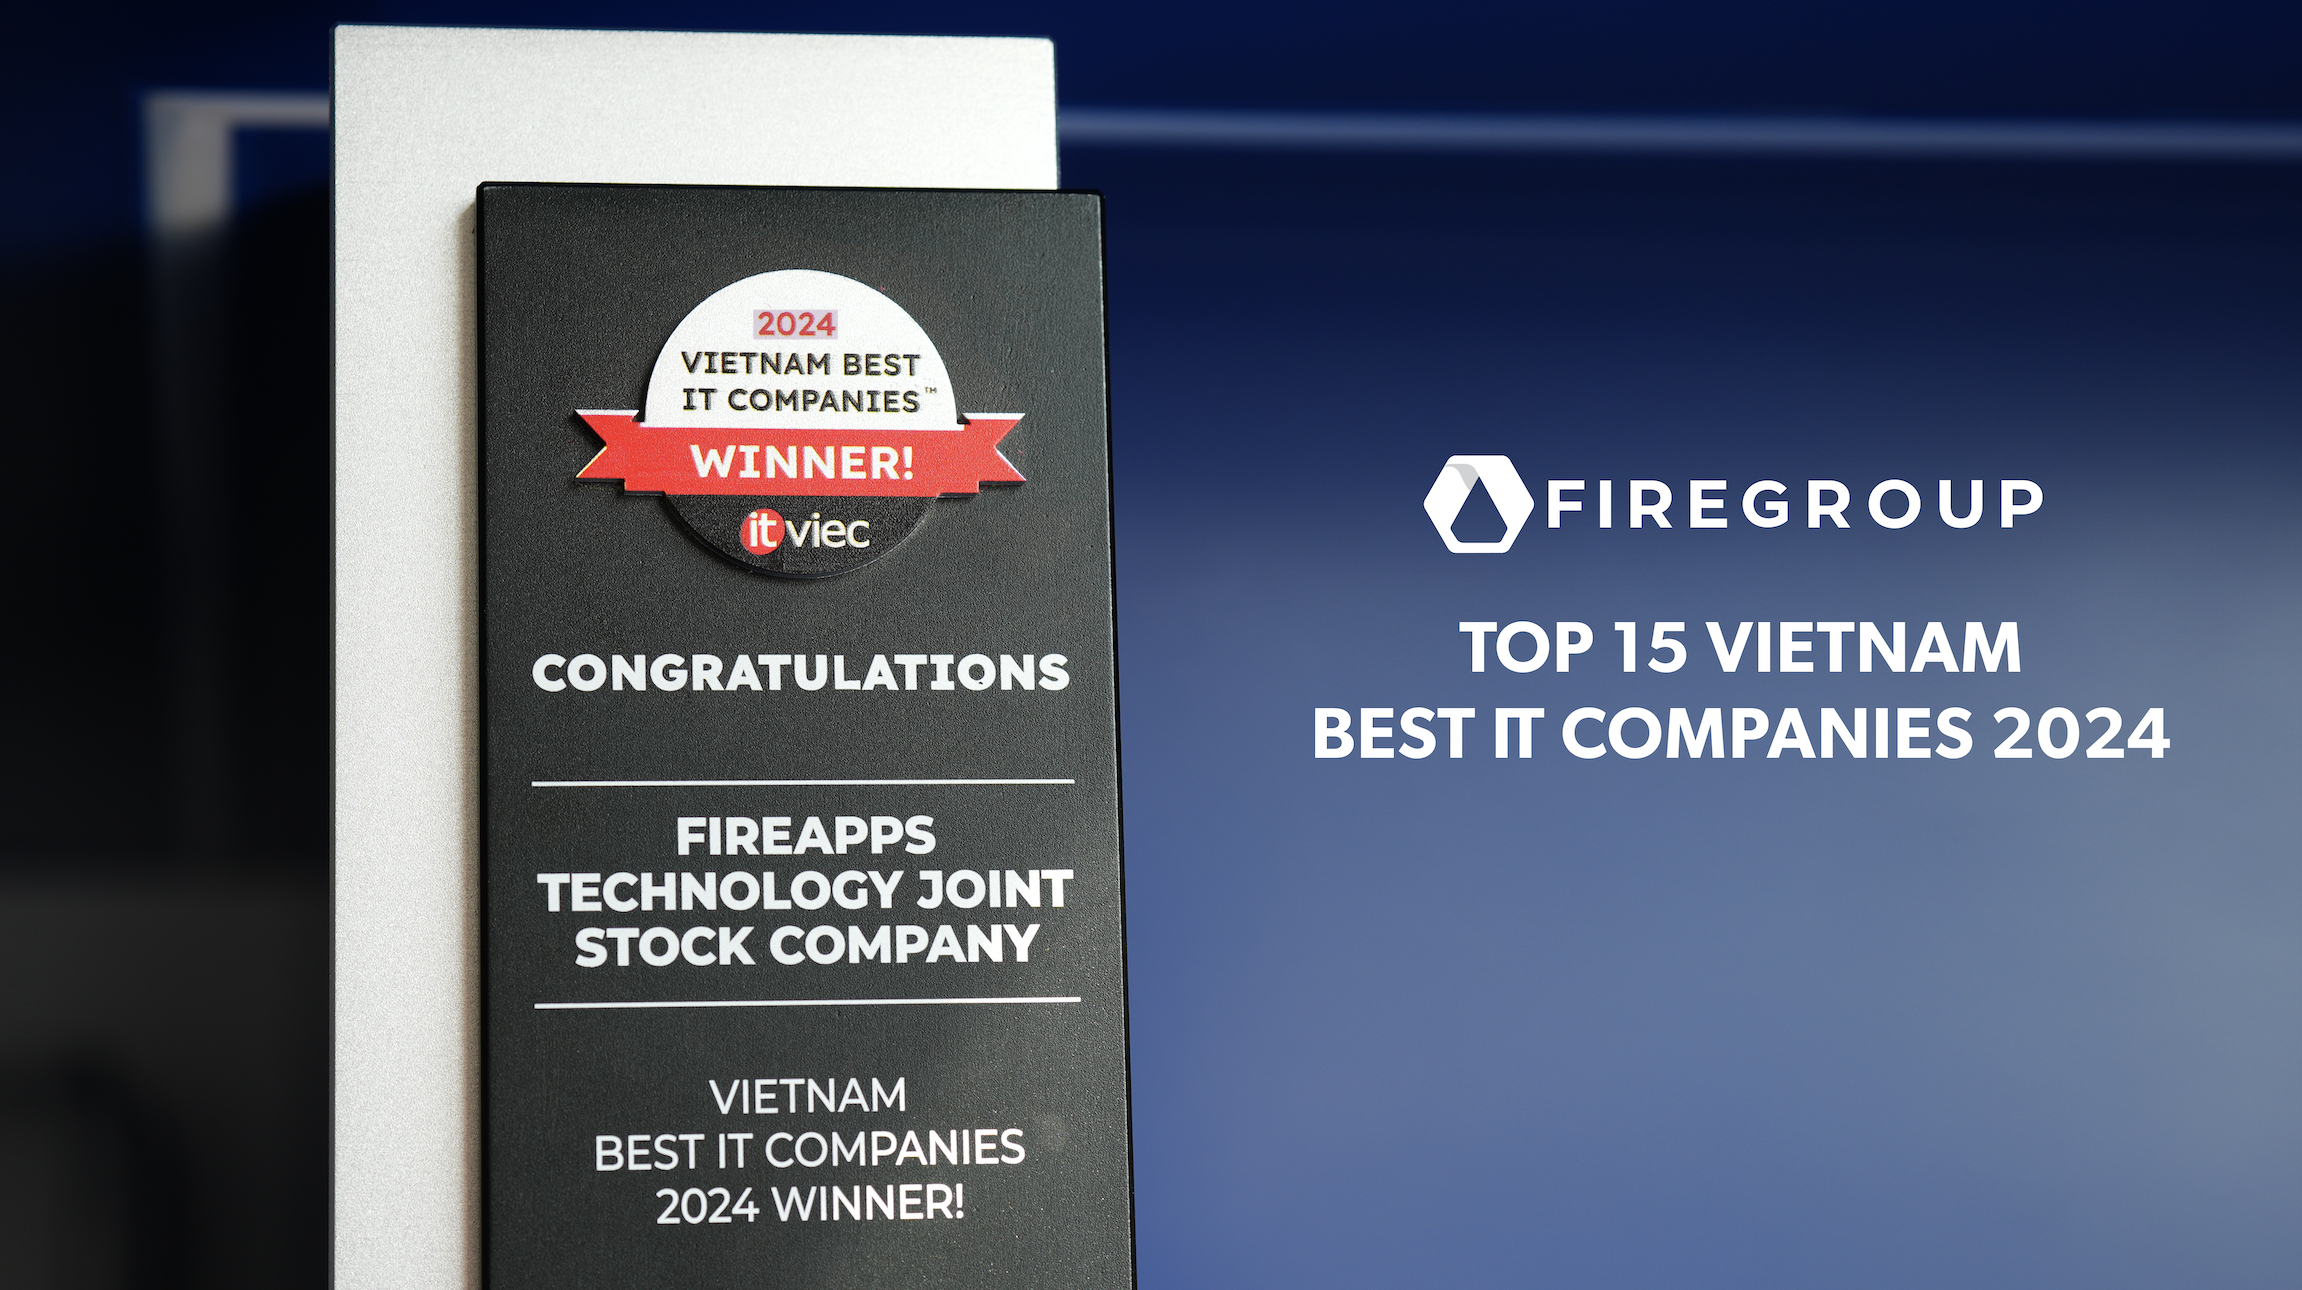 FireGroup Awarded Top 15 Vietnam Best IT Companies 2024 by ITviec